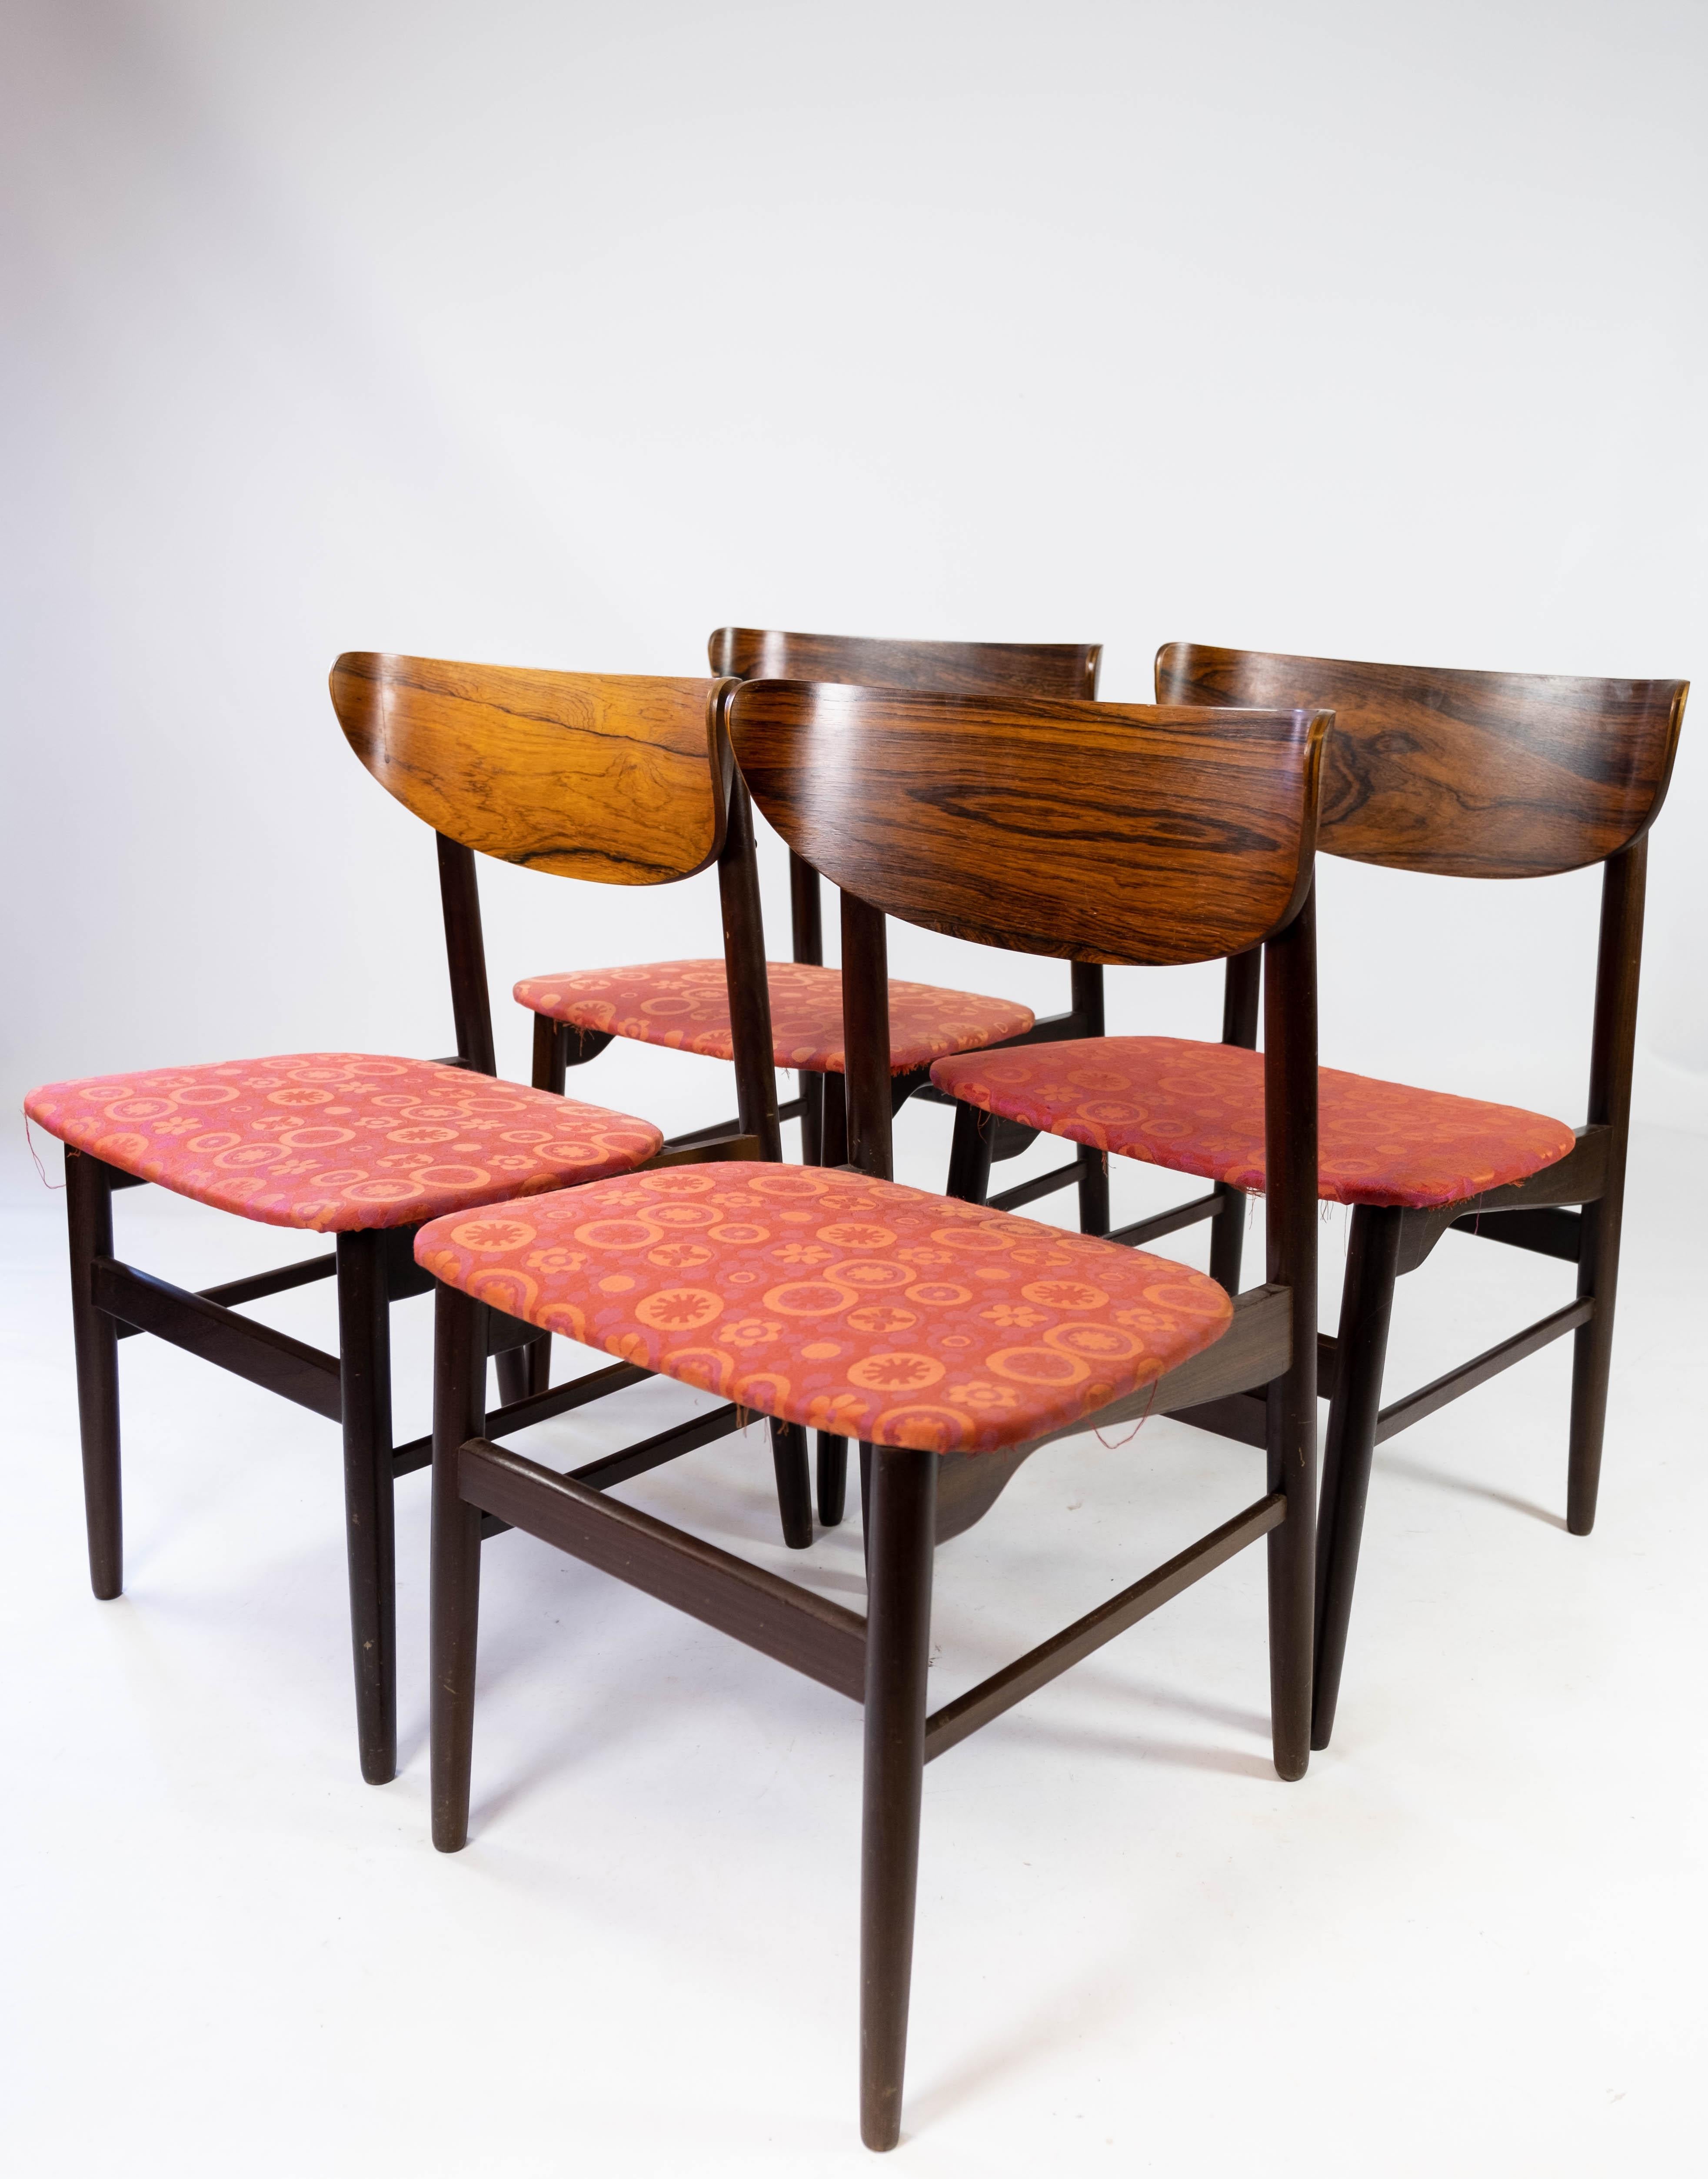 Scandinavian Modern Set of Four Dining Room Chairs in Rosewood, of Danish Design, 1960s For Sale